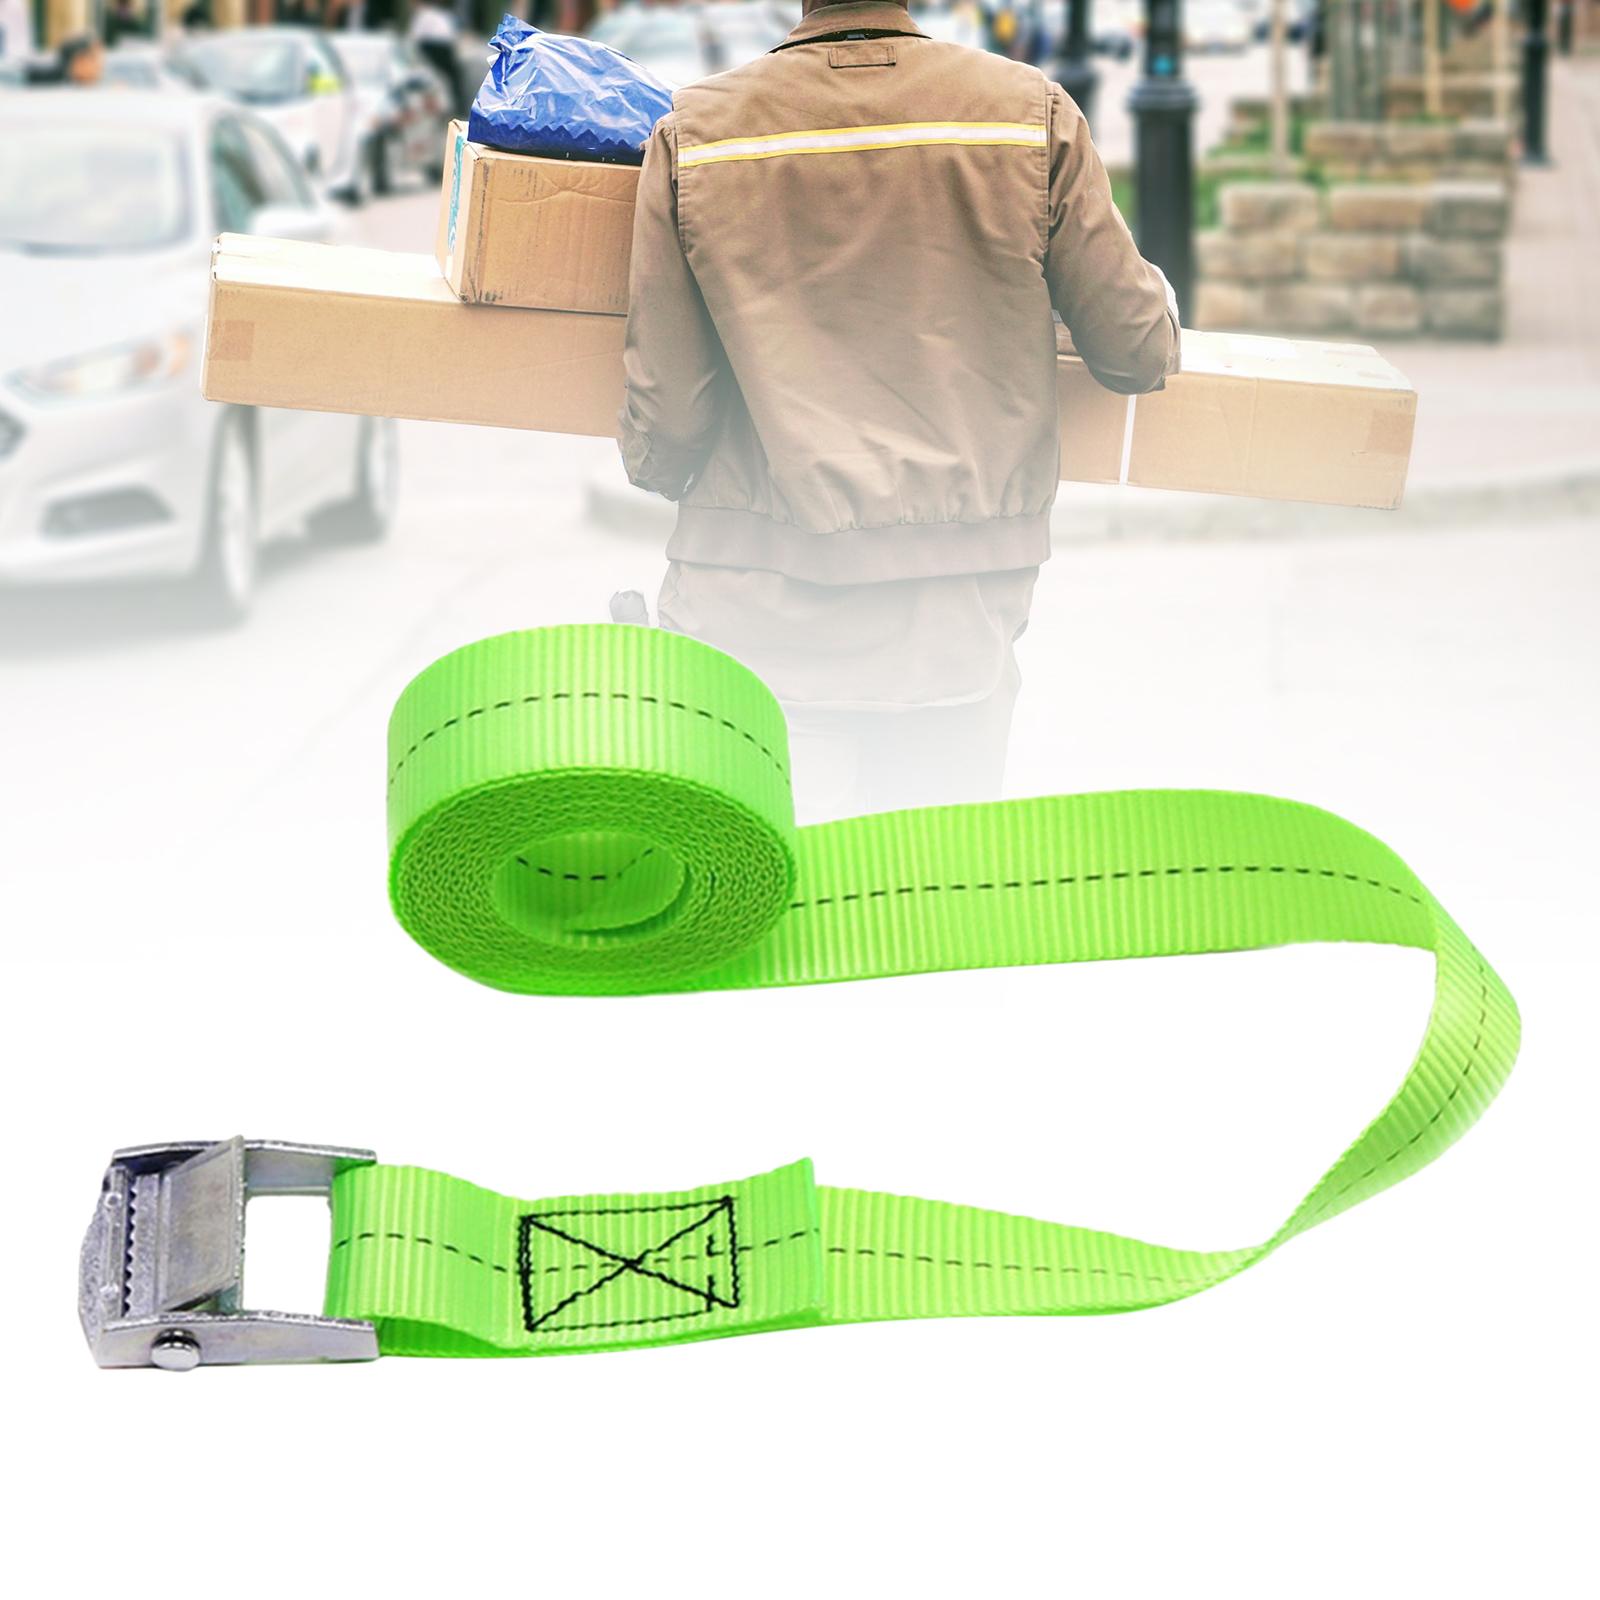 Luggage Strap Travel Luminous Lashing Straps for Traveling Outdoor Trips 196.8inch